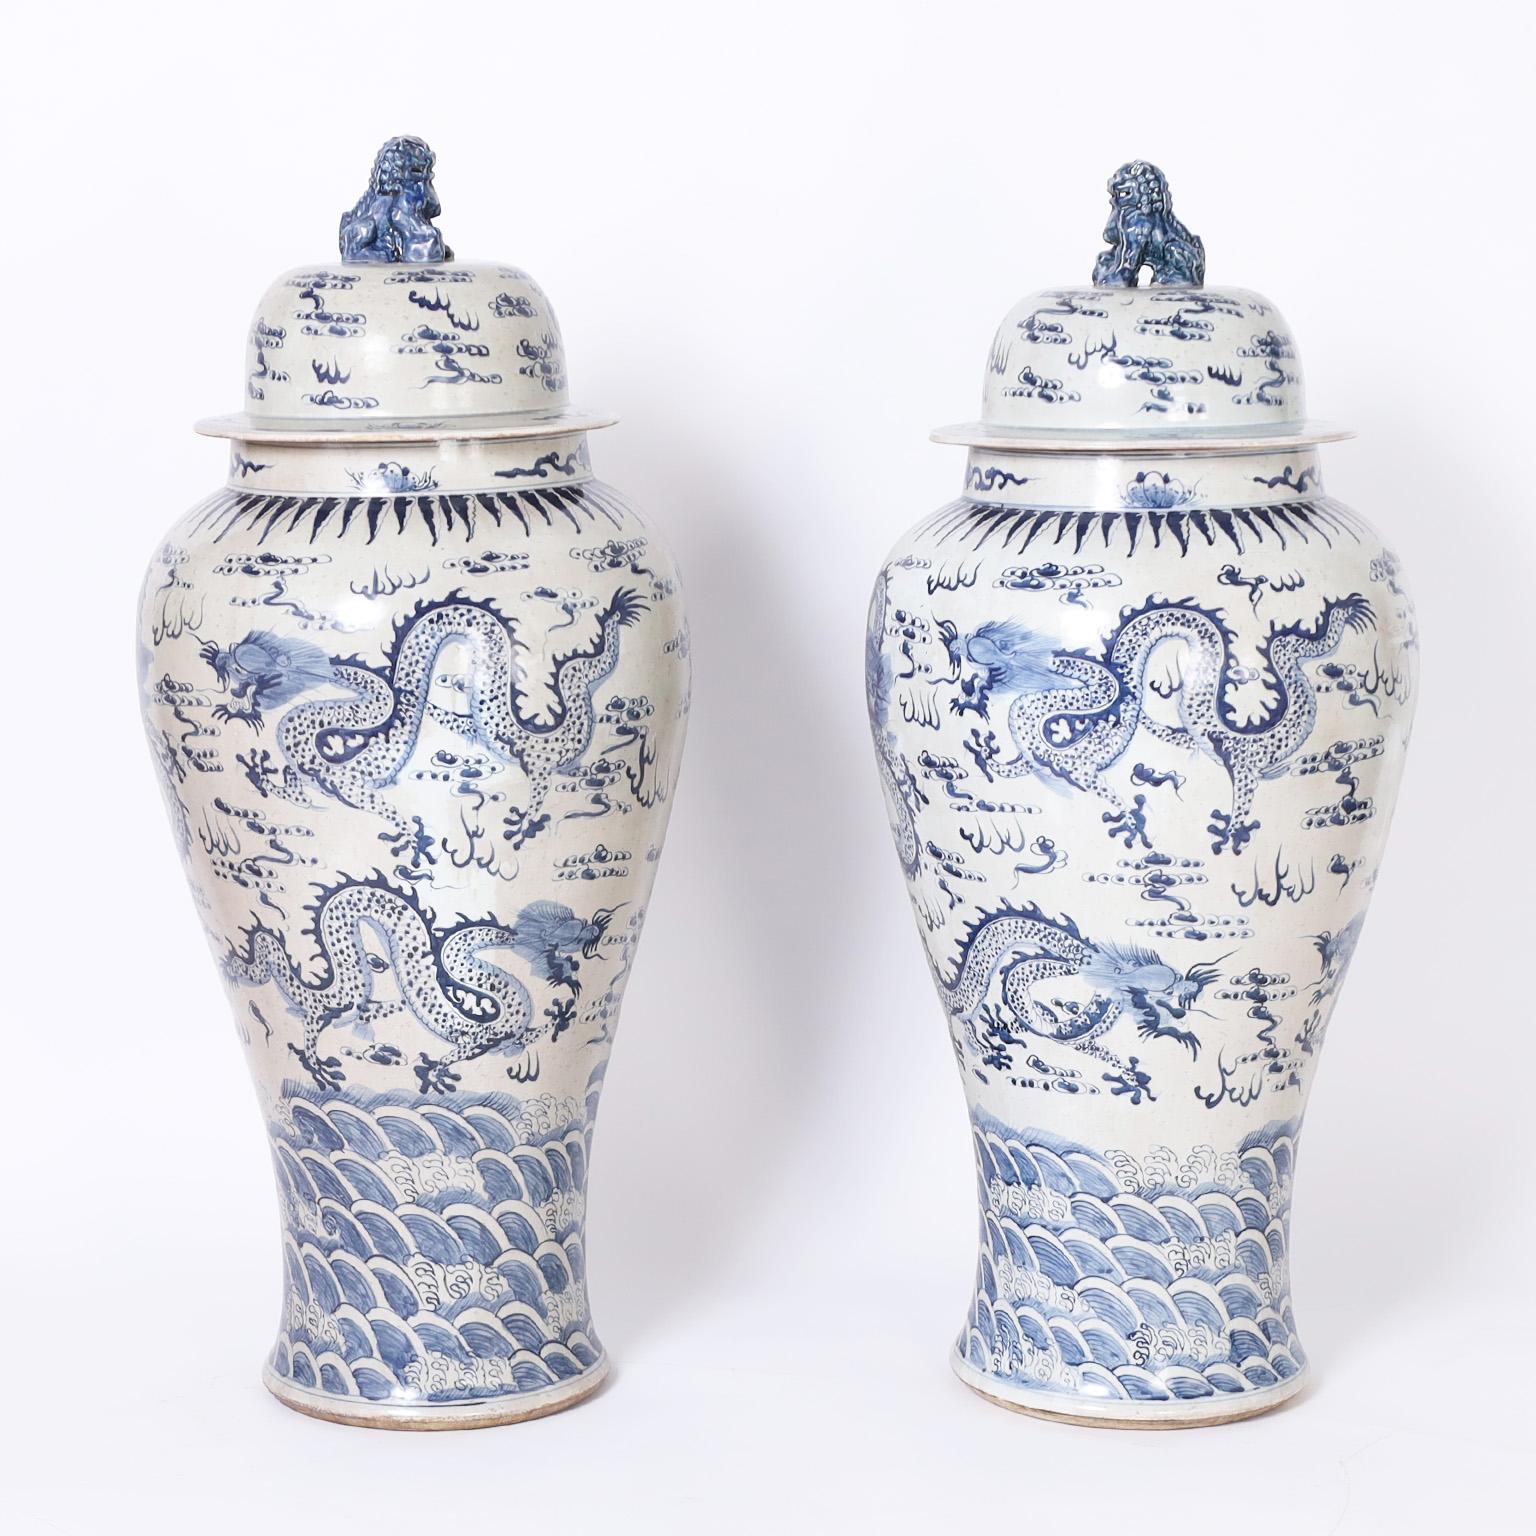 Pair of palace urns with a bold scale and featuring foo dog handles on top as guardians and hand decorated with a dragon motif.